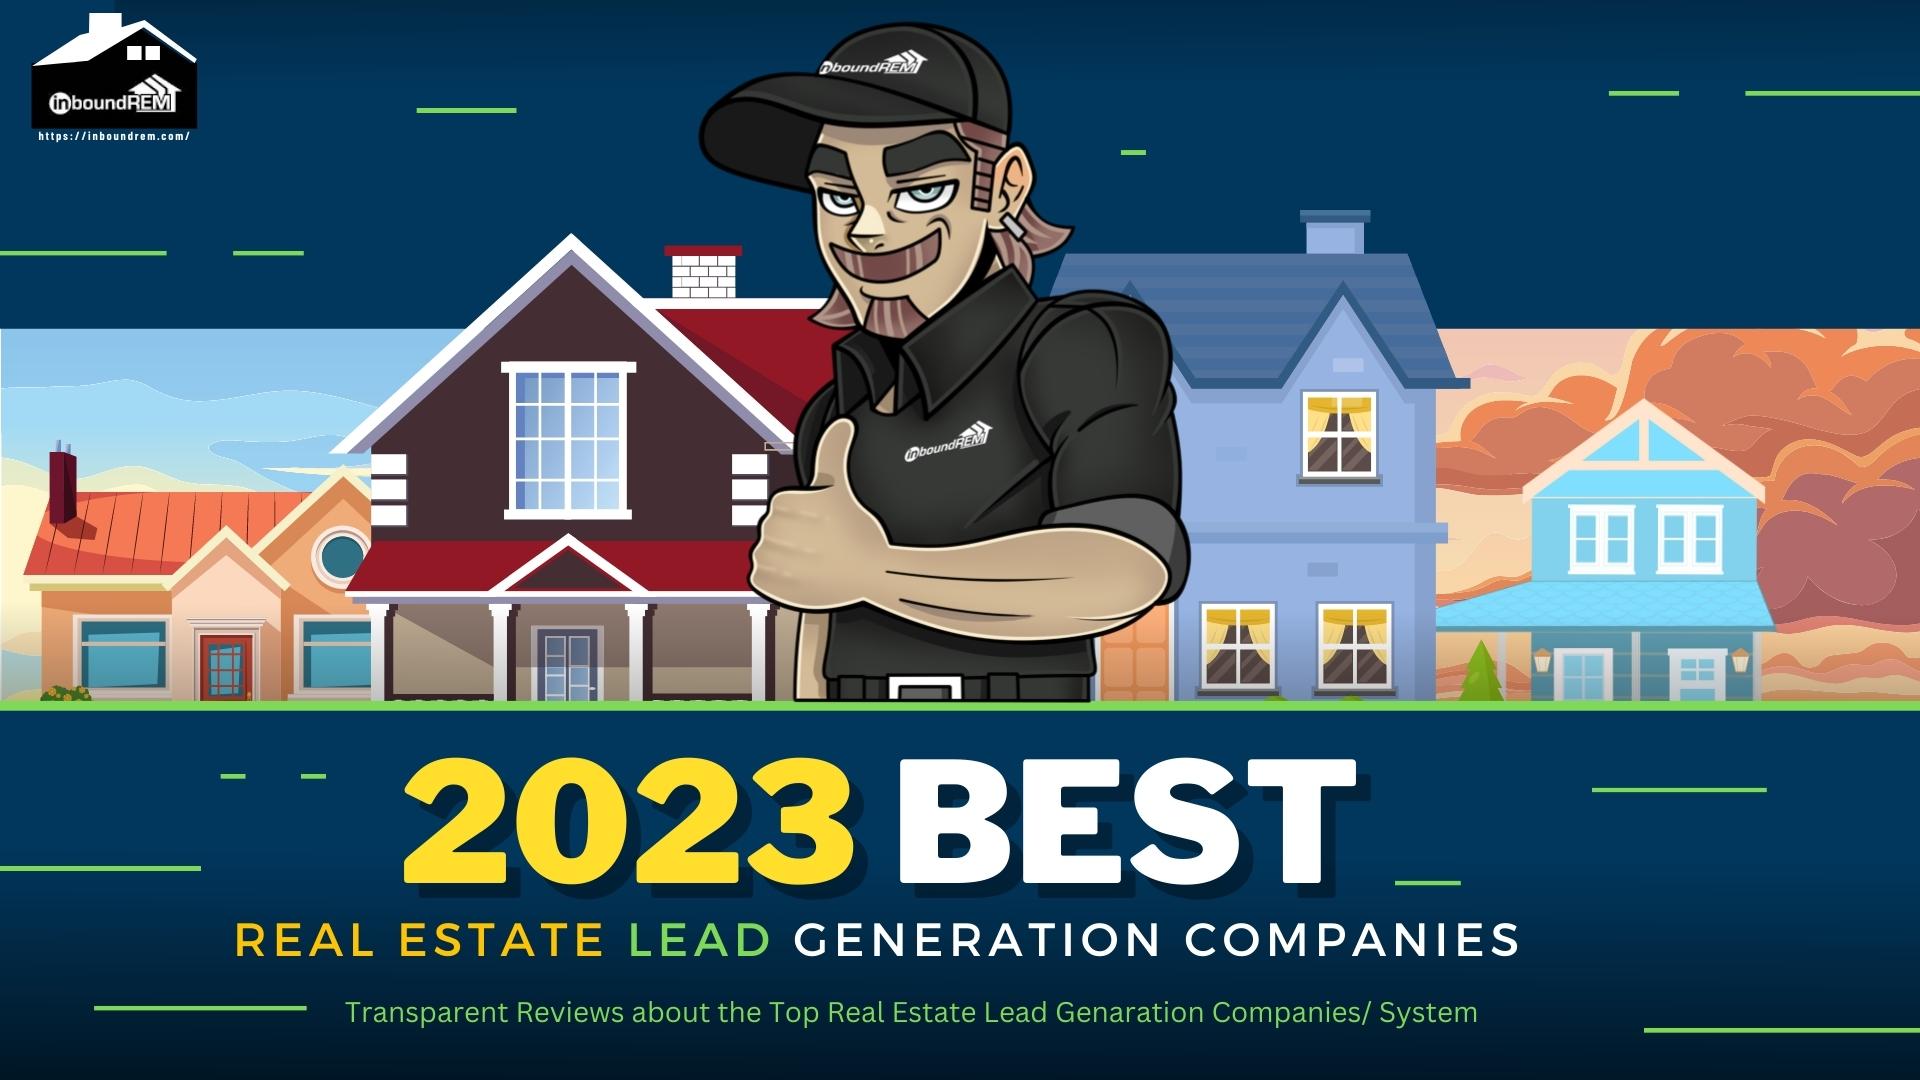 guide and list to the best lead generation companies for real estate realtors and agents in 2023